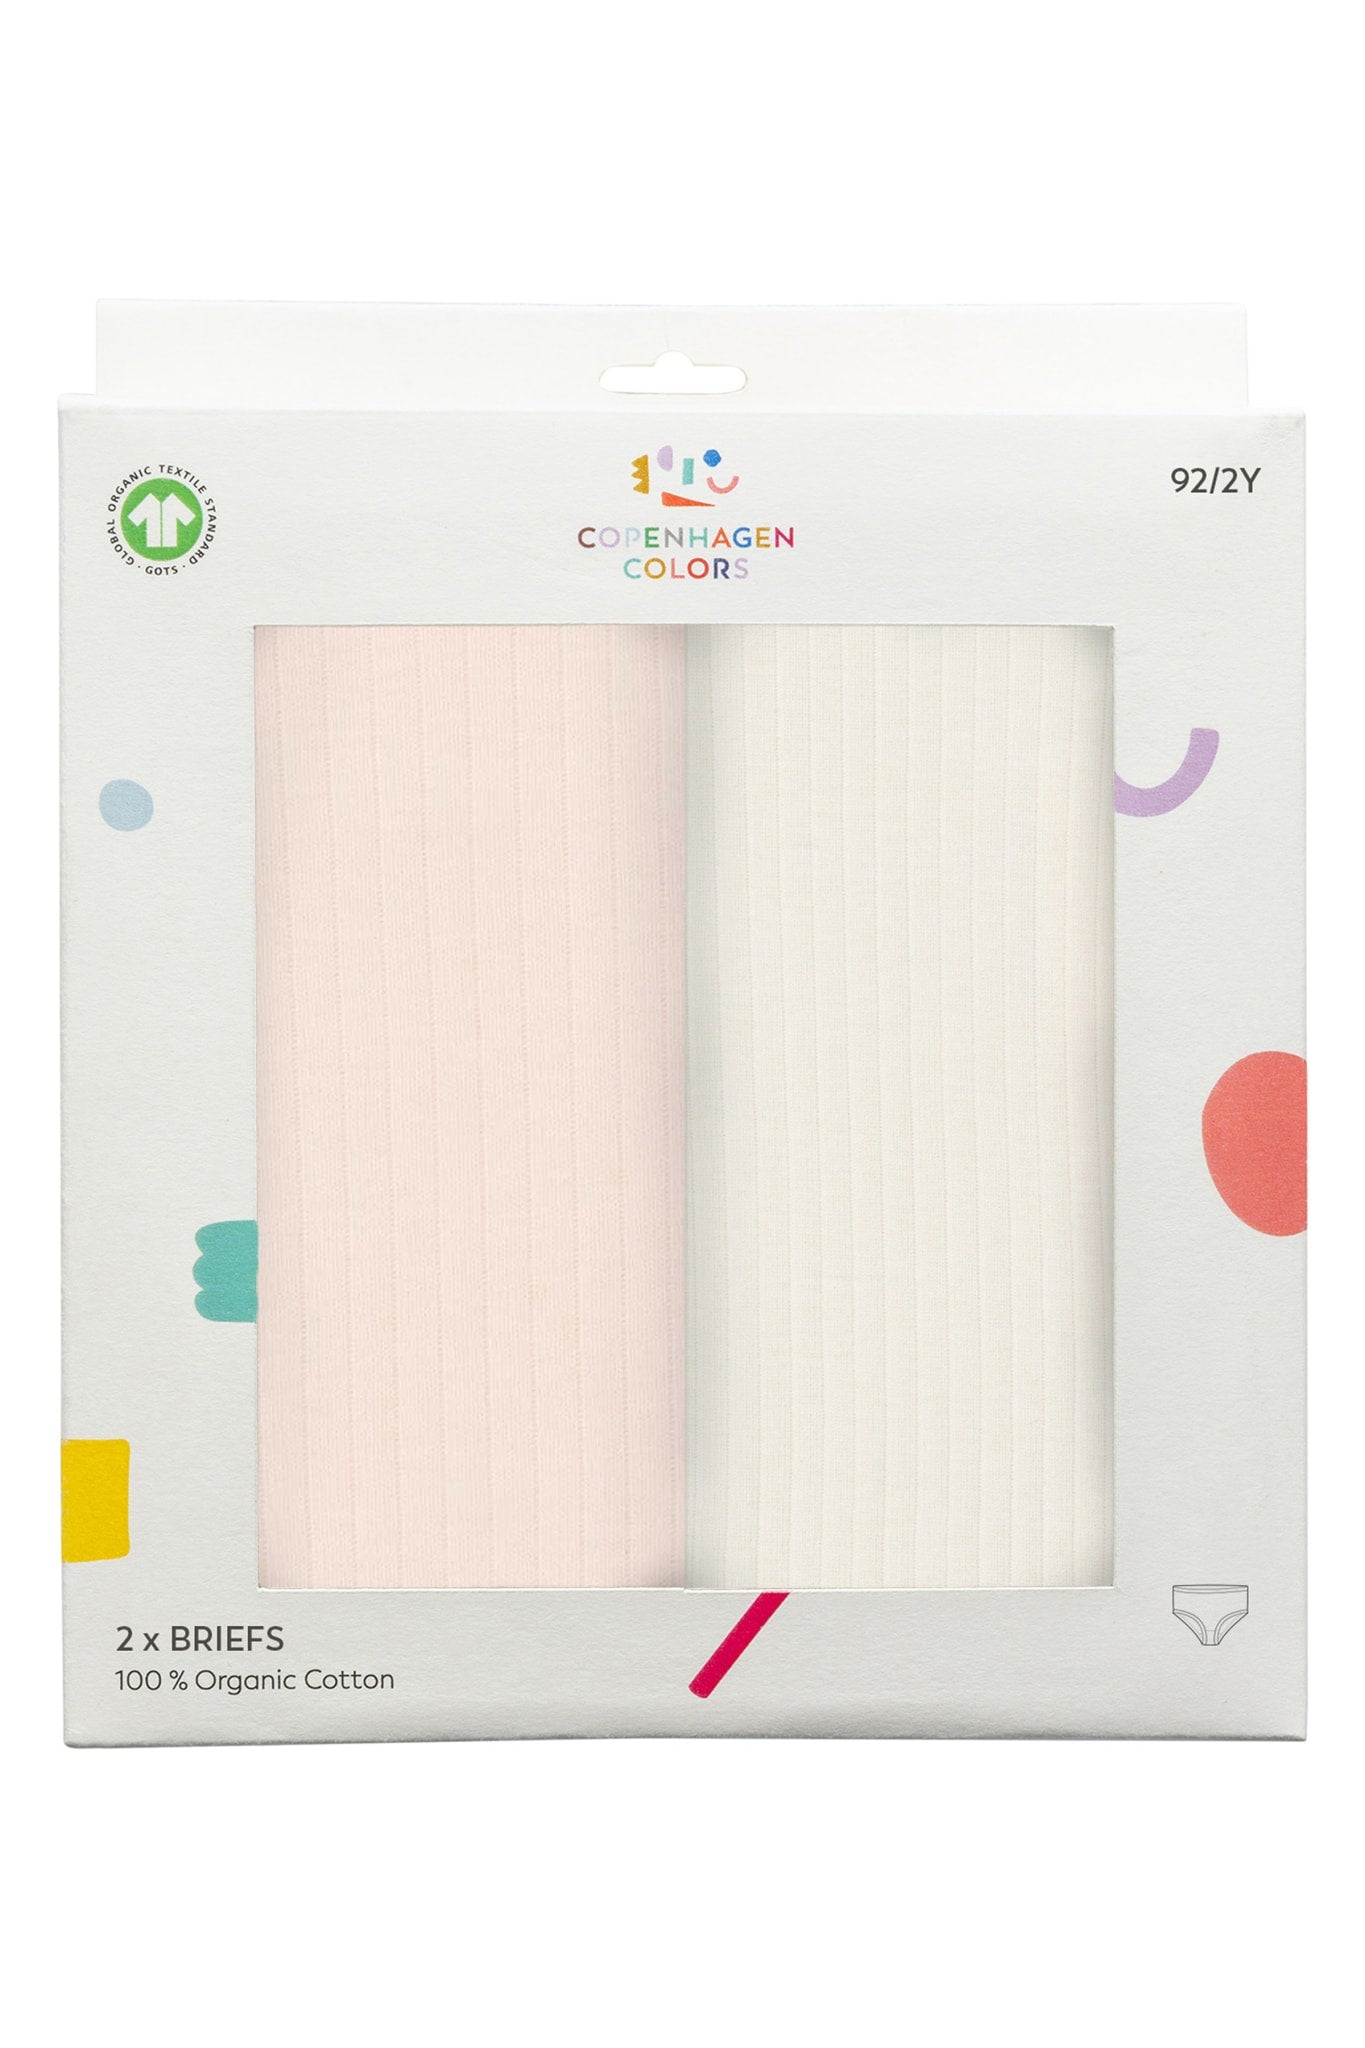 RIB JERSEY 2PACK UNDERPANTS - SOFT PINK/ CREAM COMB. CORE